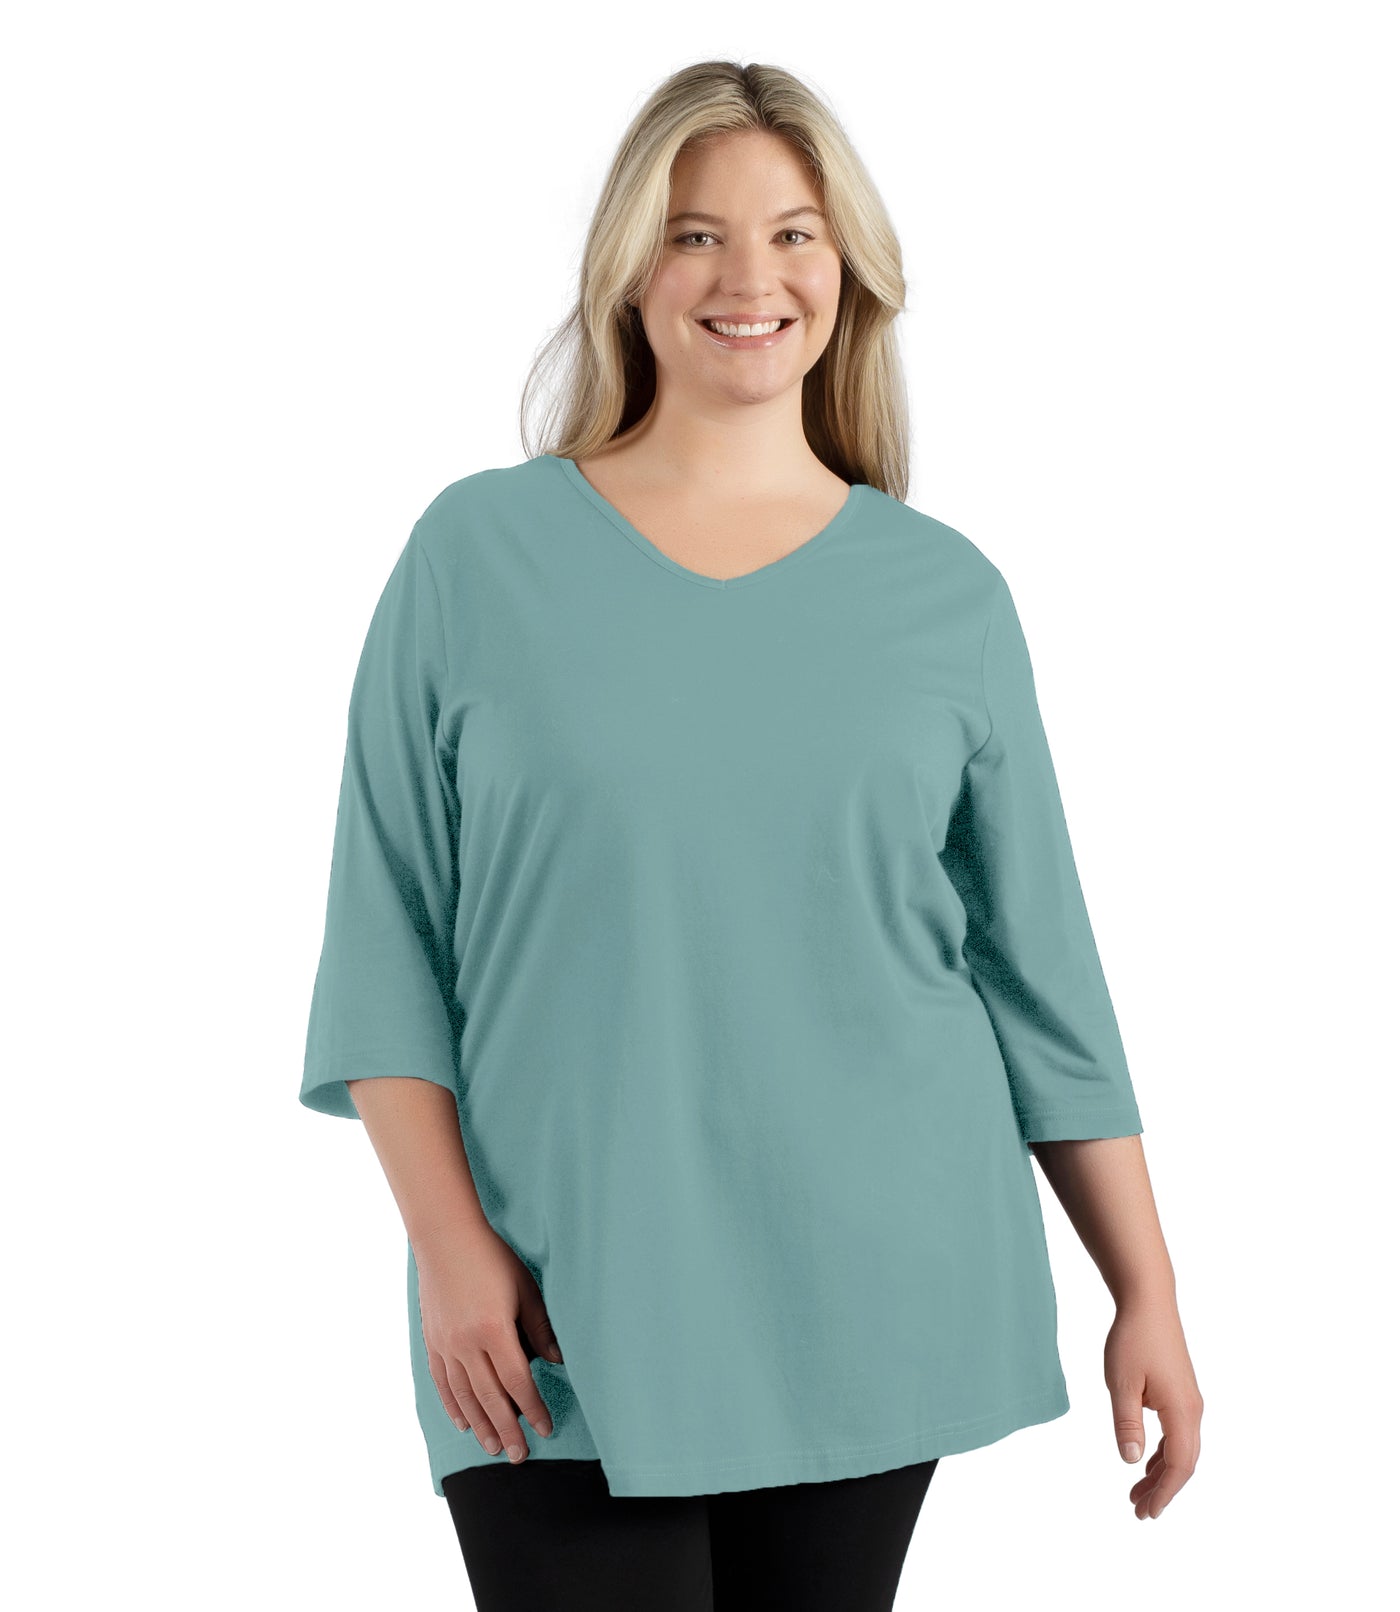 Plus size woman, facing front, wearing JunoActive’s Stretch Naturals Lite 3/4 Sleeve V-neck Tunic, color robin blue. Arms by side.